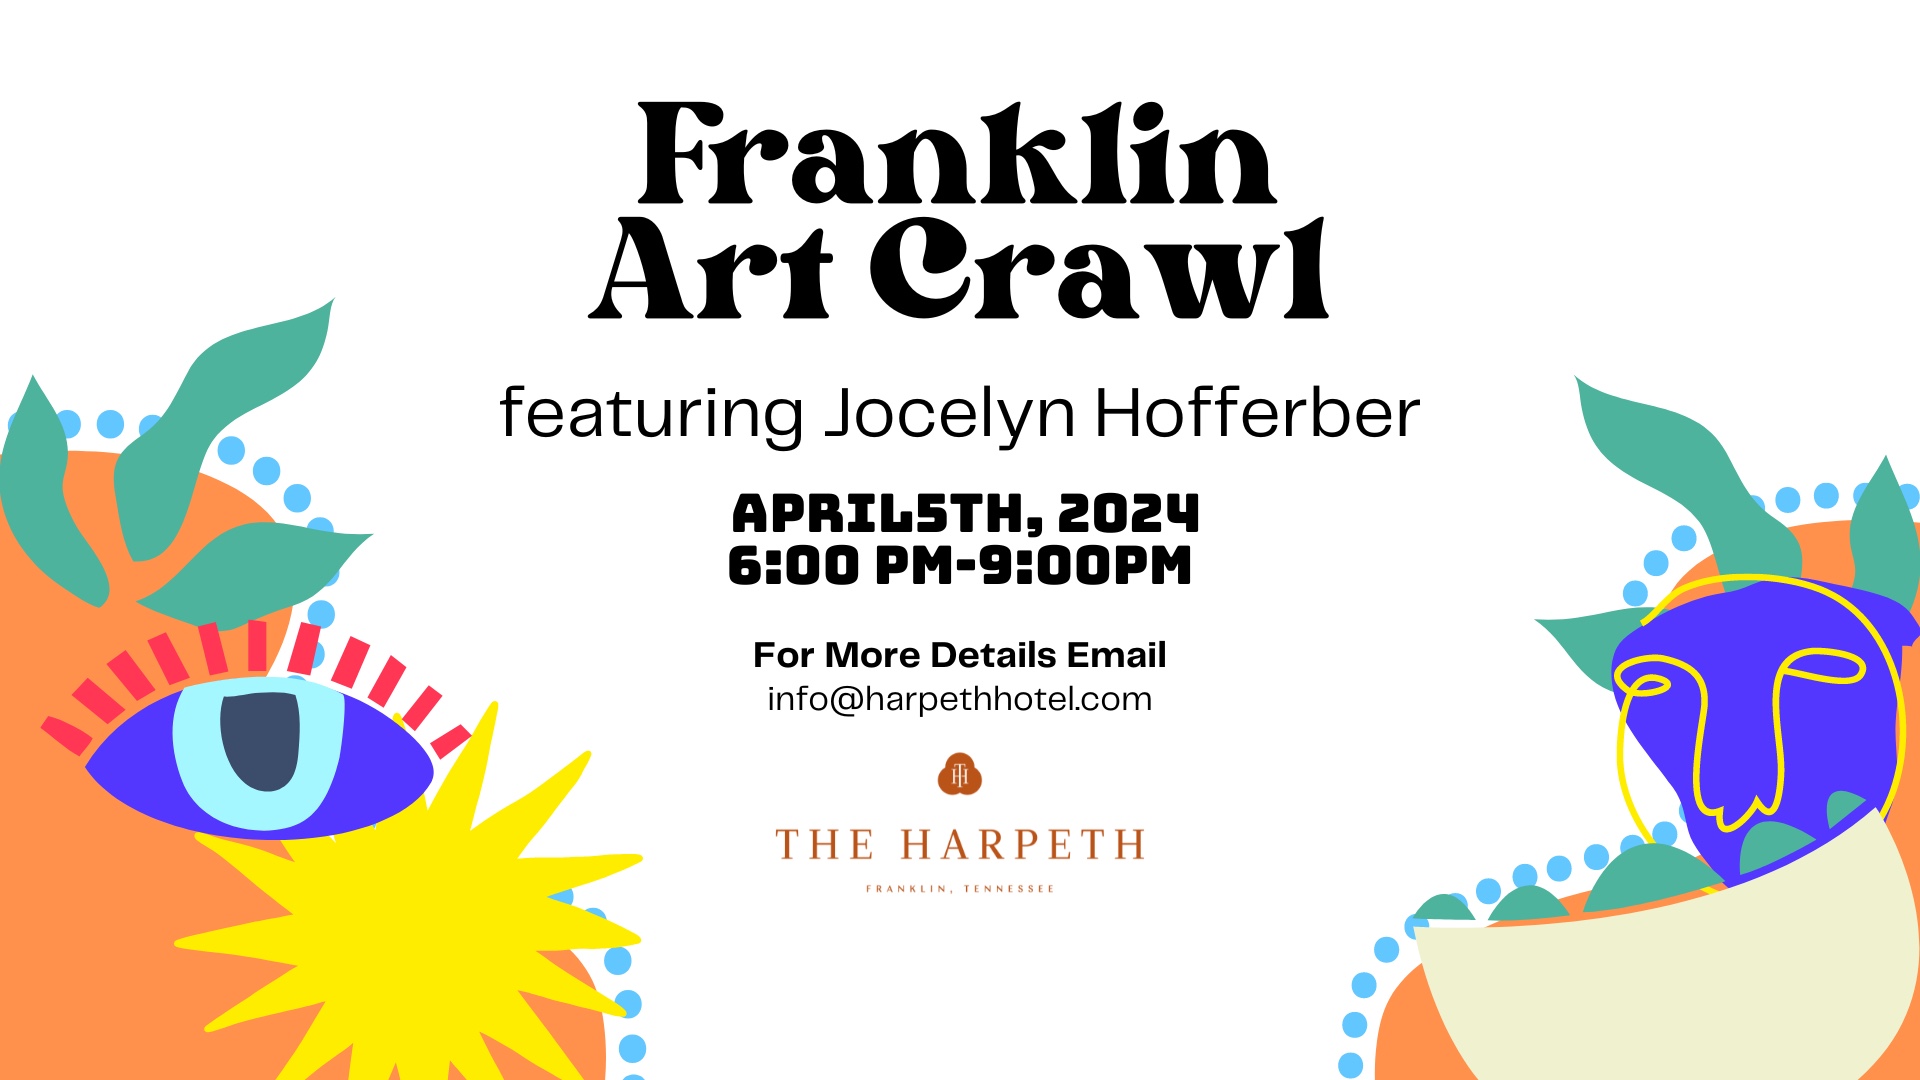 Franklin Art Crawl at The Harpeth Downtown Franklin.